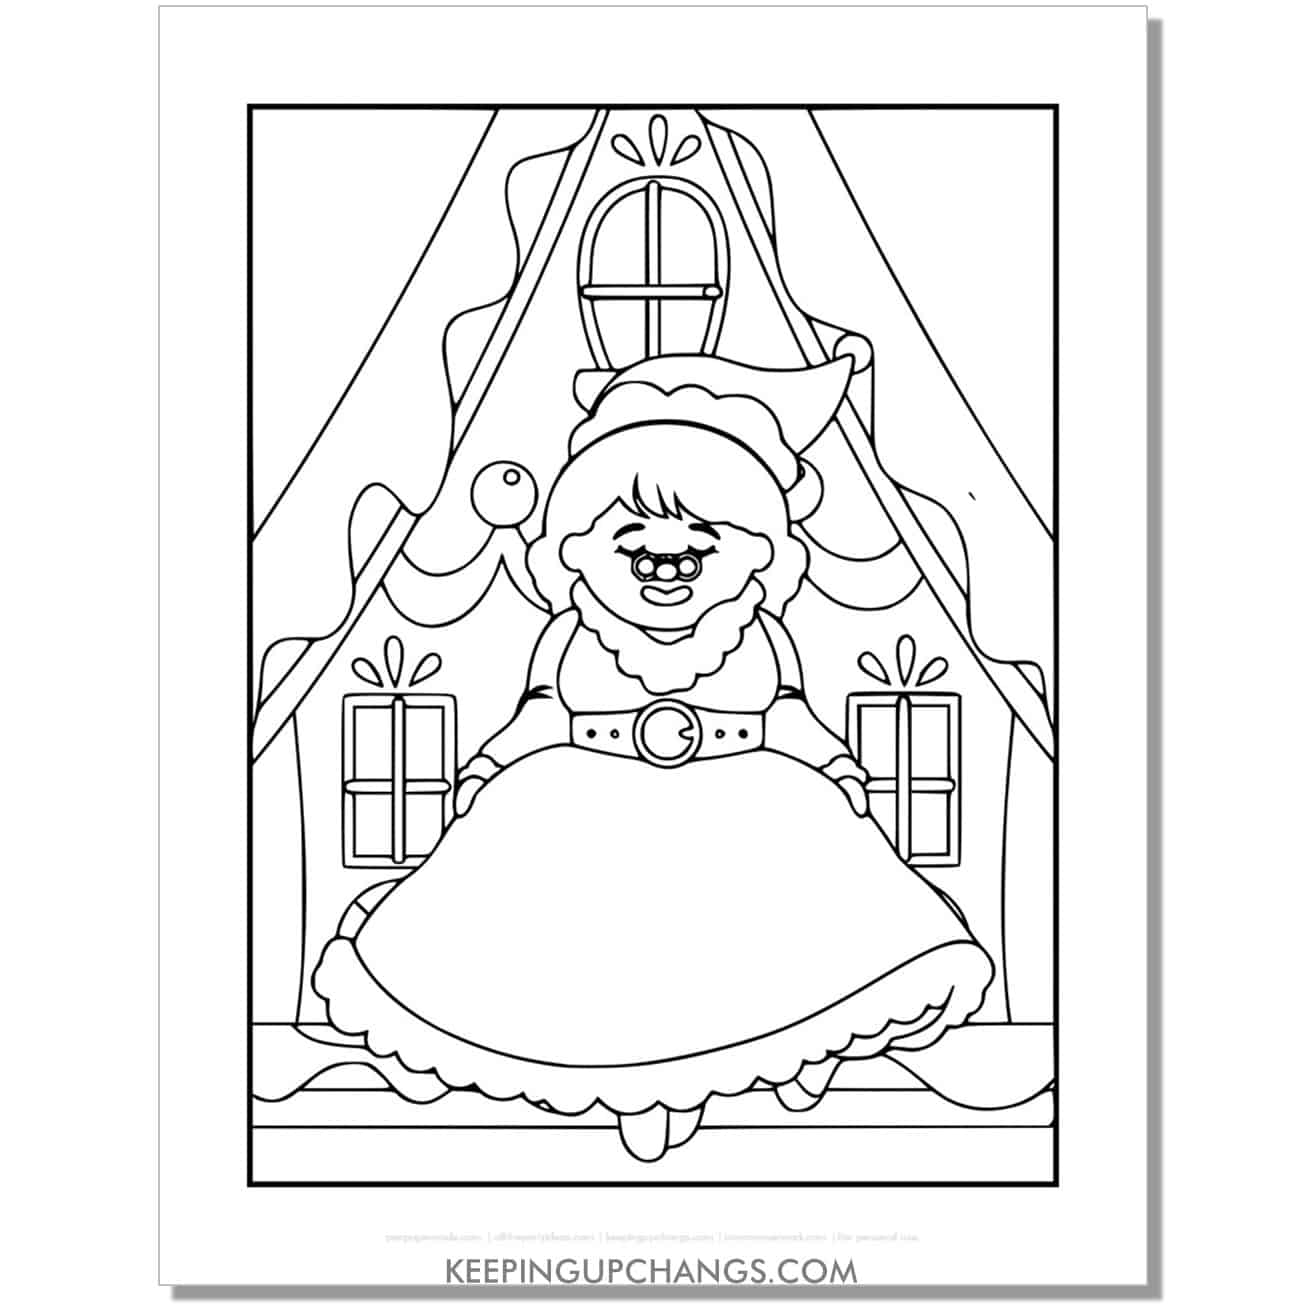 free adorable santa's mrs. claus in front of house workshop full size coloring page.